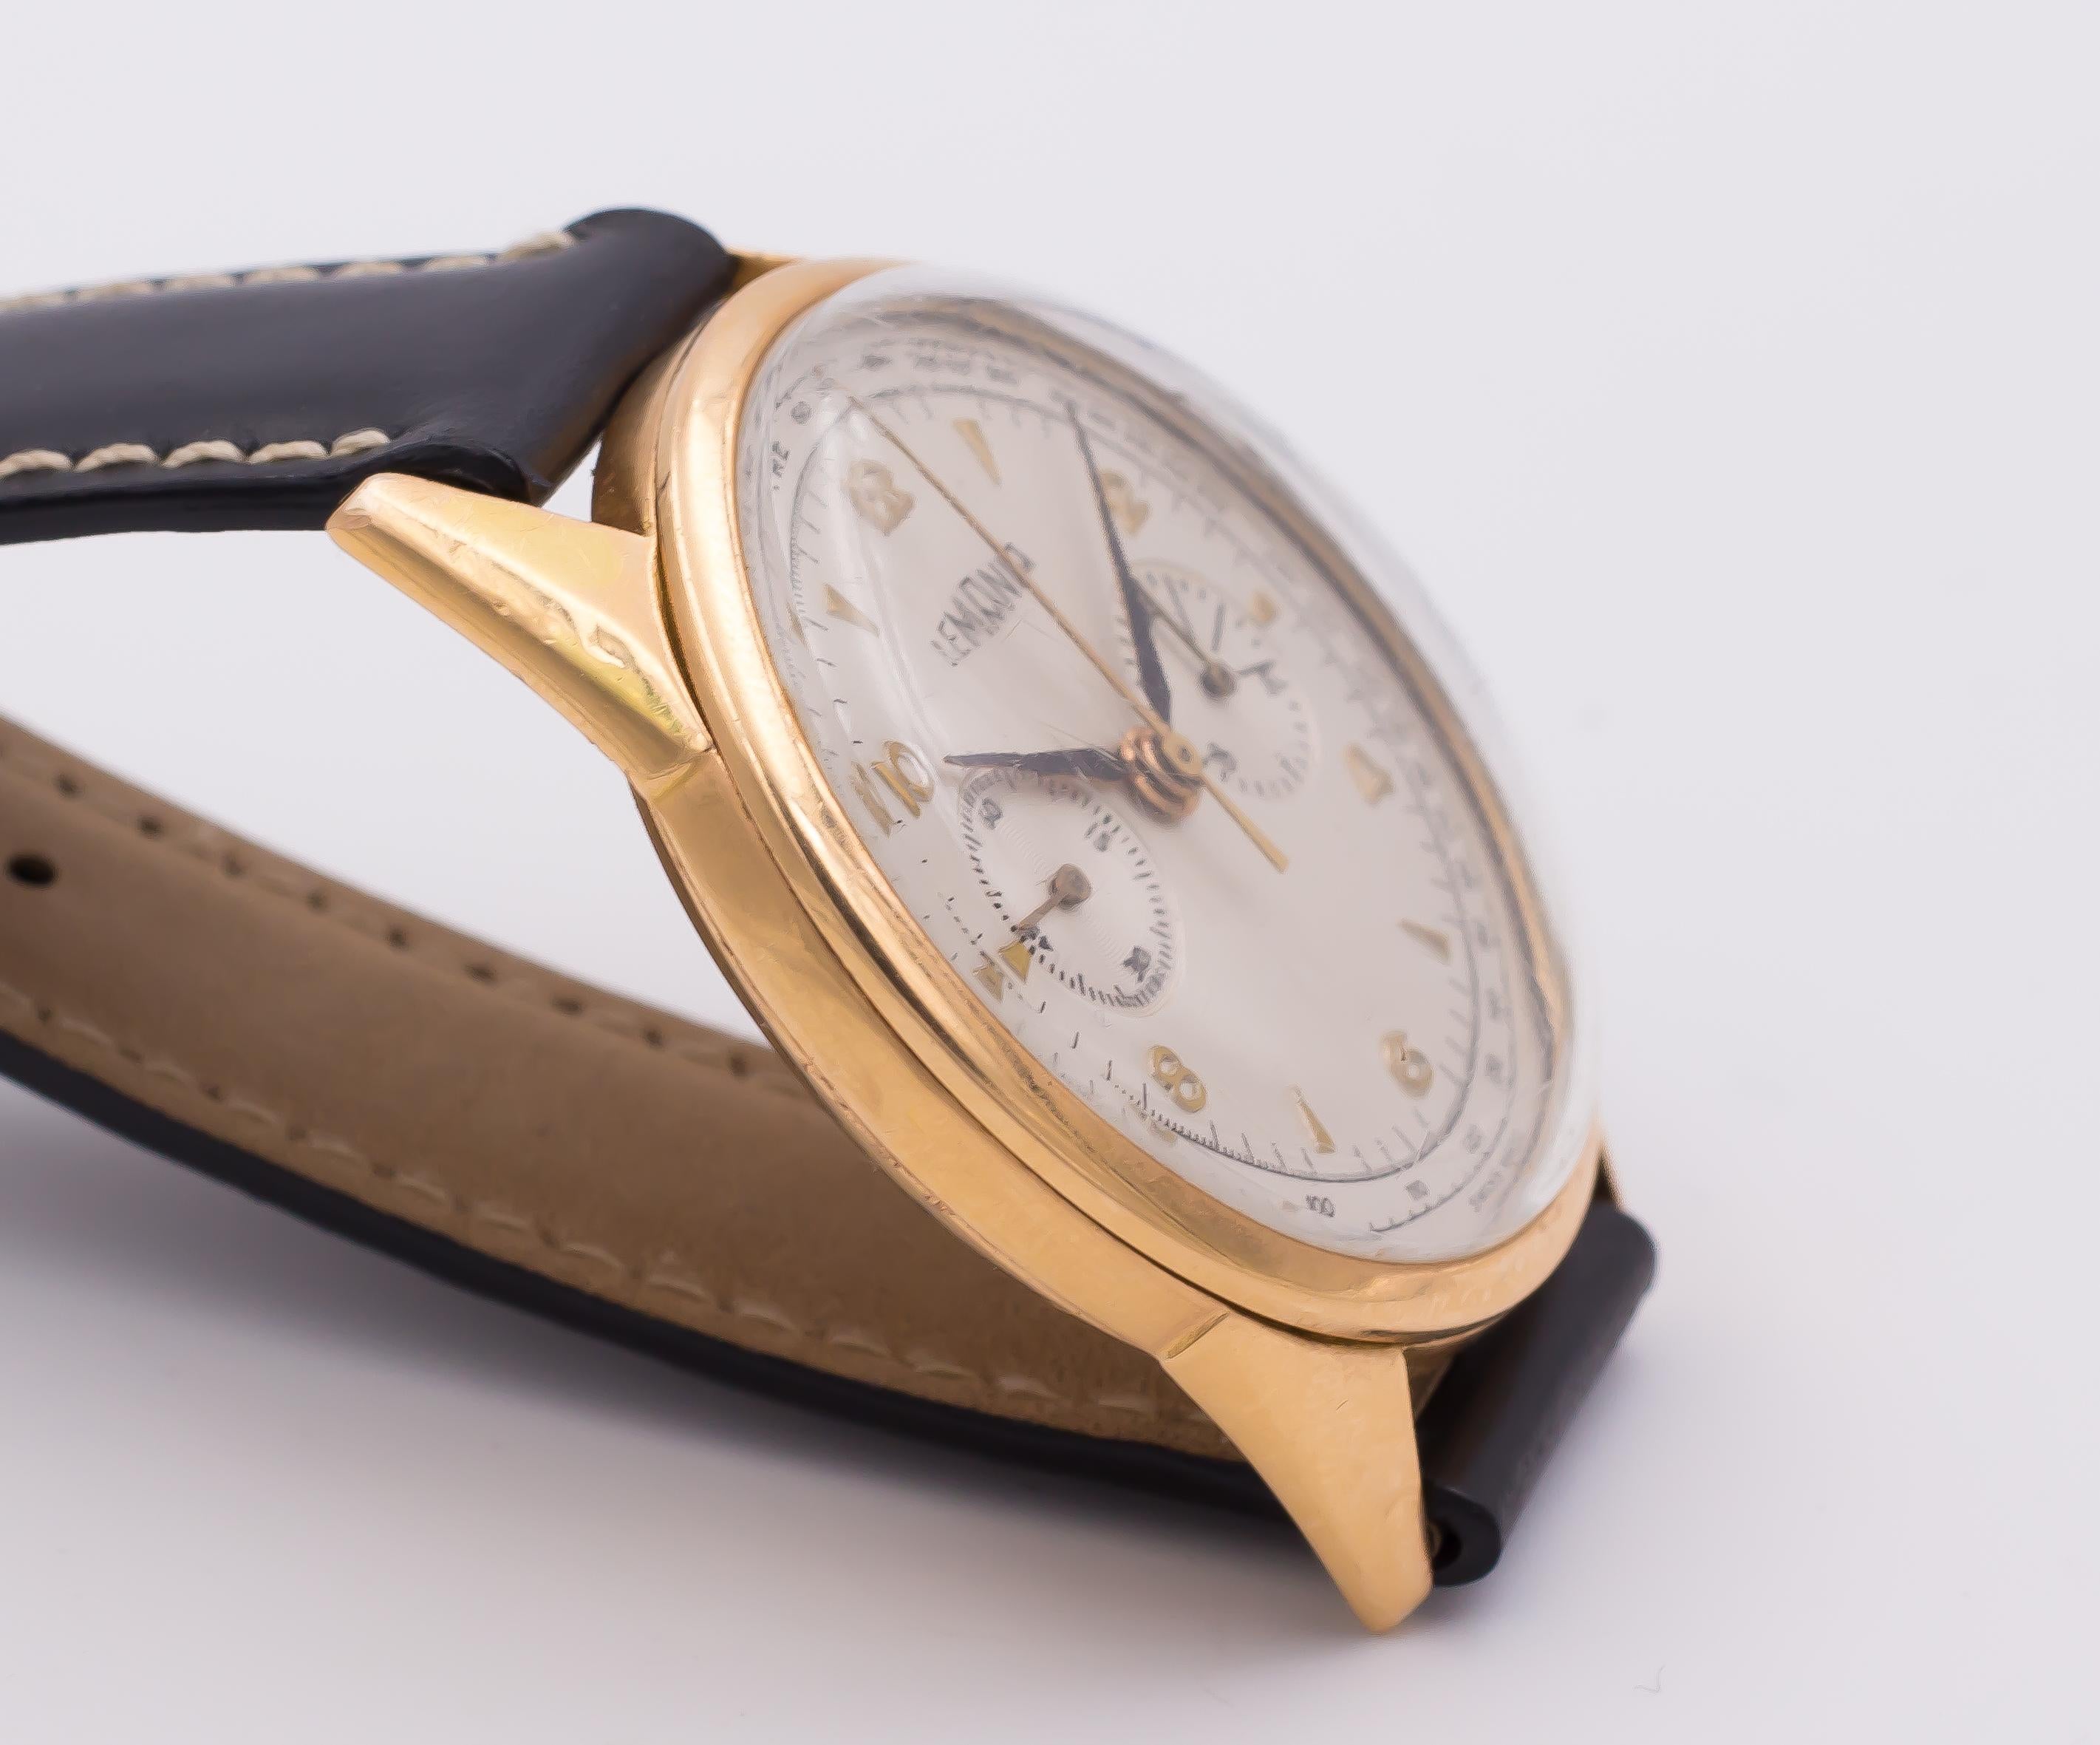 A vintage 18K gold Lemania wrist watch, dating from the 1950s. 
The watch is well working.

BRAND
Lemania

MATERIALS
18K gold

MEASUREMENTS
Diameter: 37 mm